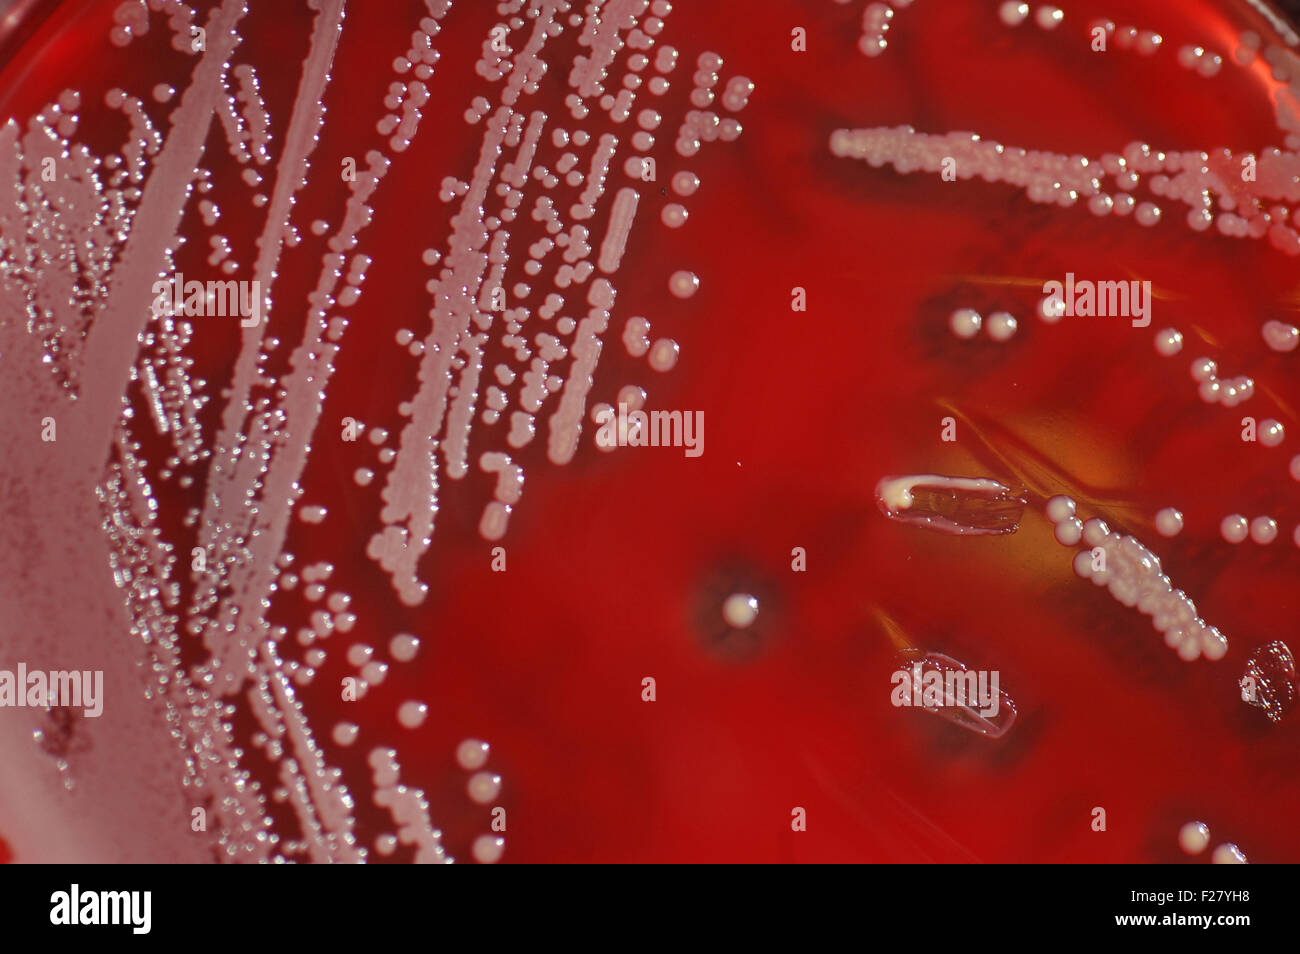 Bacterial colonies growing on culture of sheep's blood Stock Photo